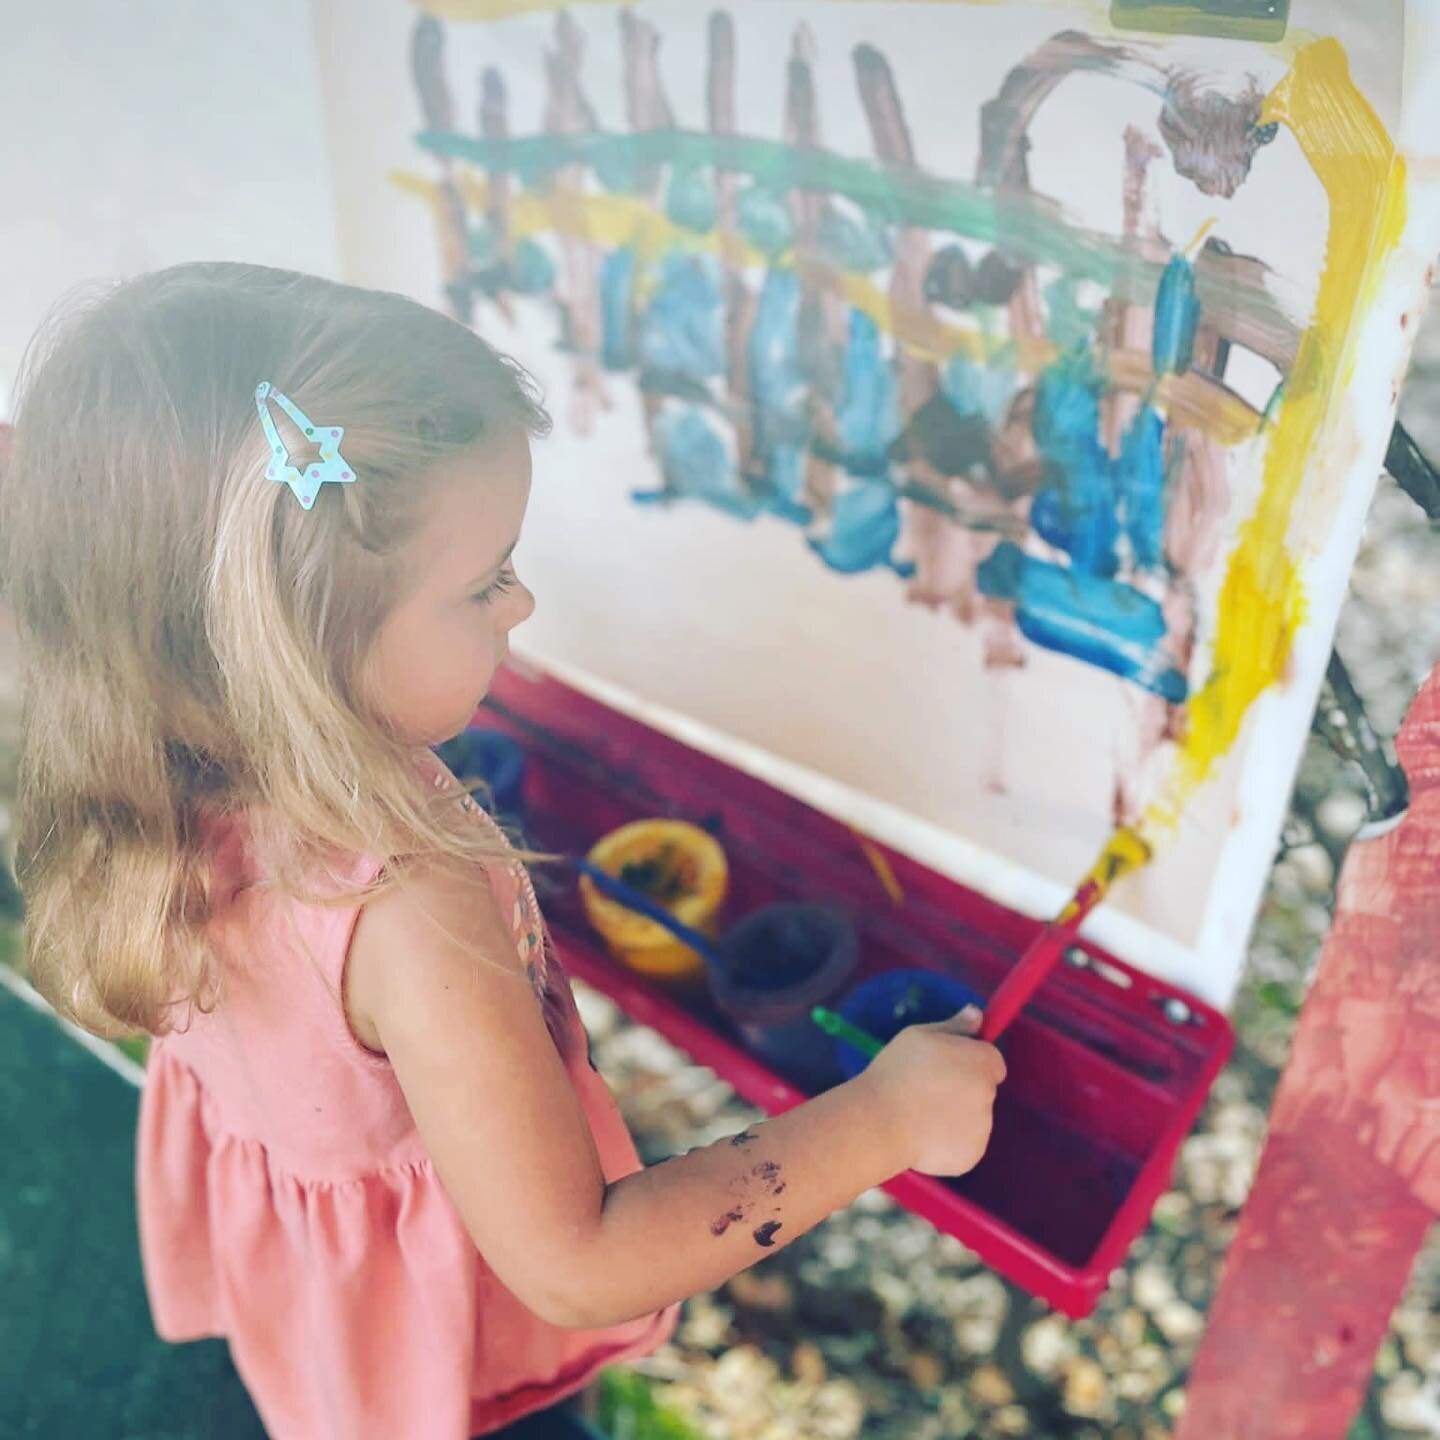 Some kids are drawn to art and watching them develop their skills and express themselves at the easels during open play is so rewarding! 

#playbasedlearning #playbasedpreschool #socialemotionallearning #socialemotionaleducation #cooppreschool #paren